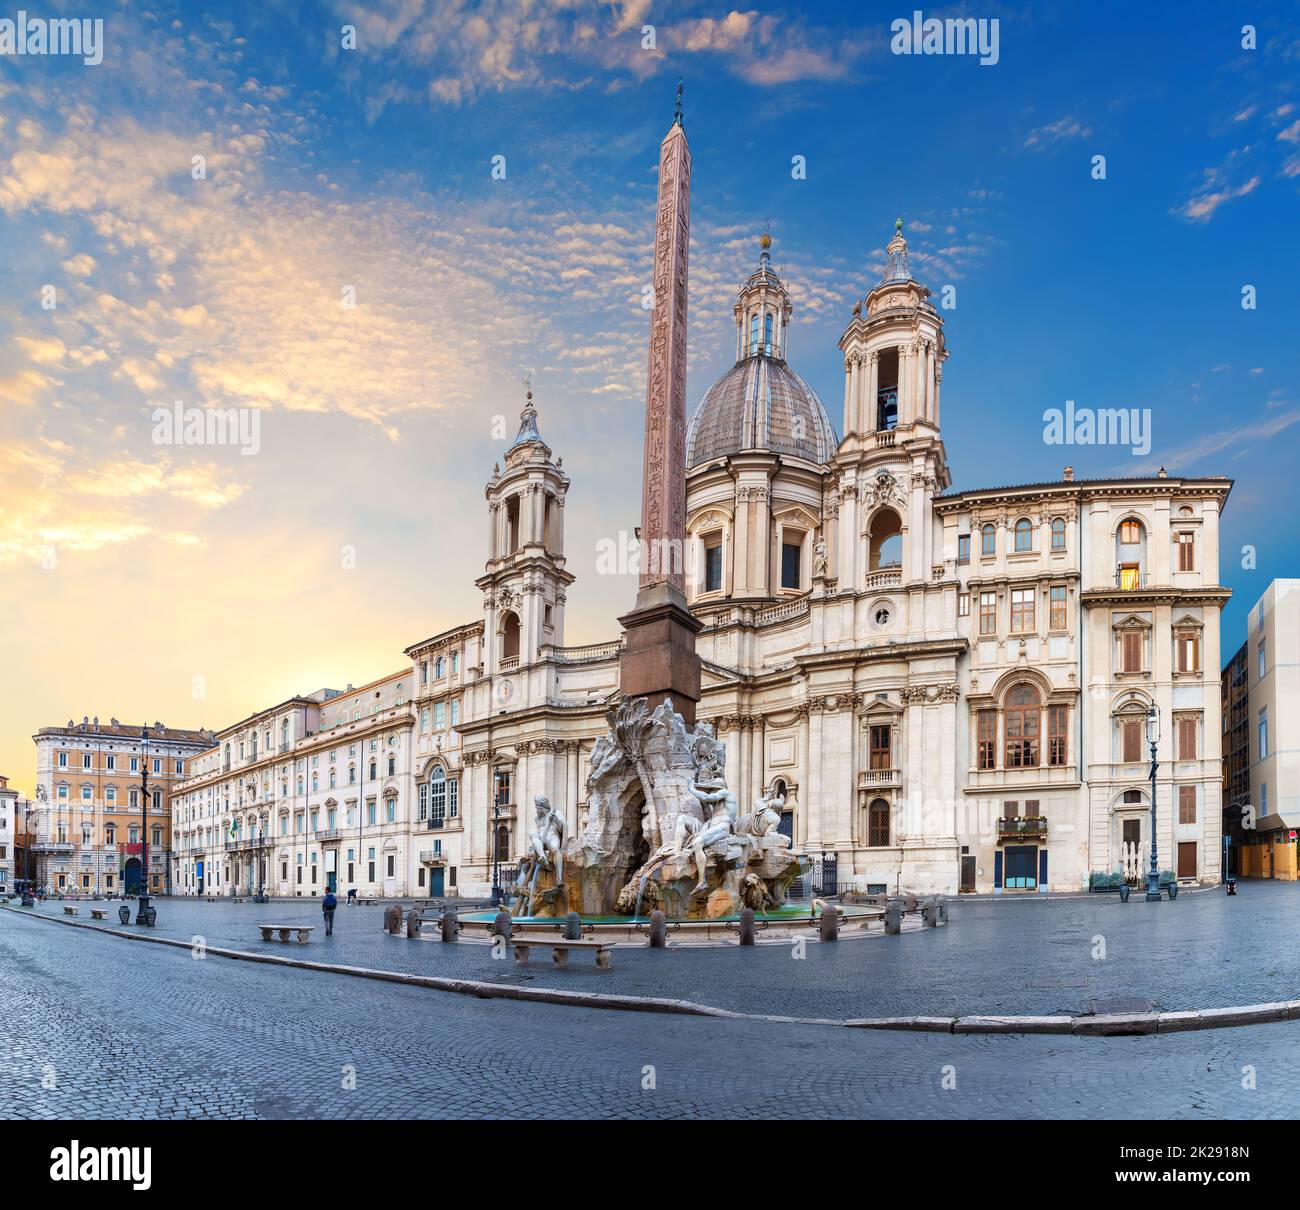 Fountain of the Four Rivers by the Church of Sant'Agnese by Bernini in Piazza Navona, Rome, Italy Stock Photo